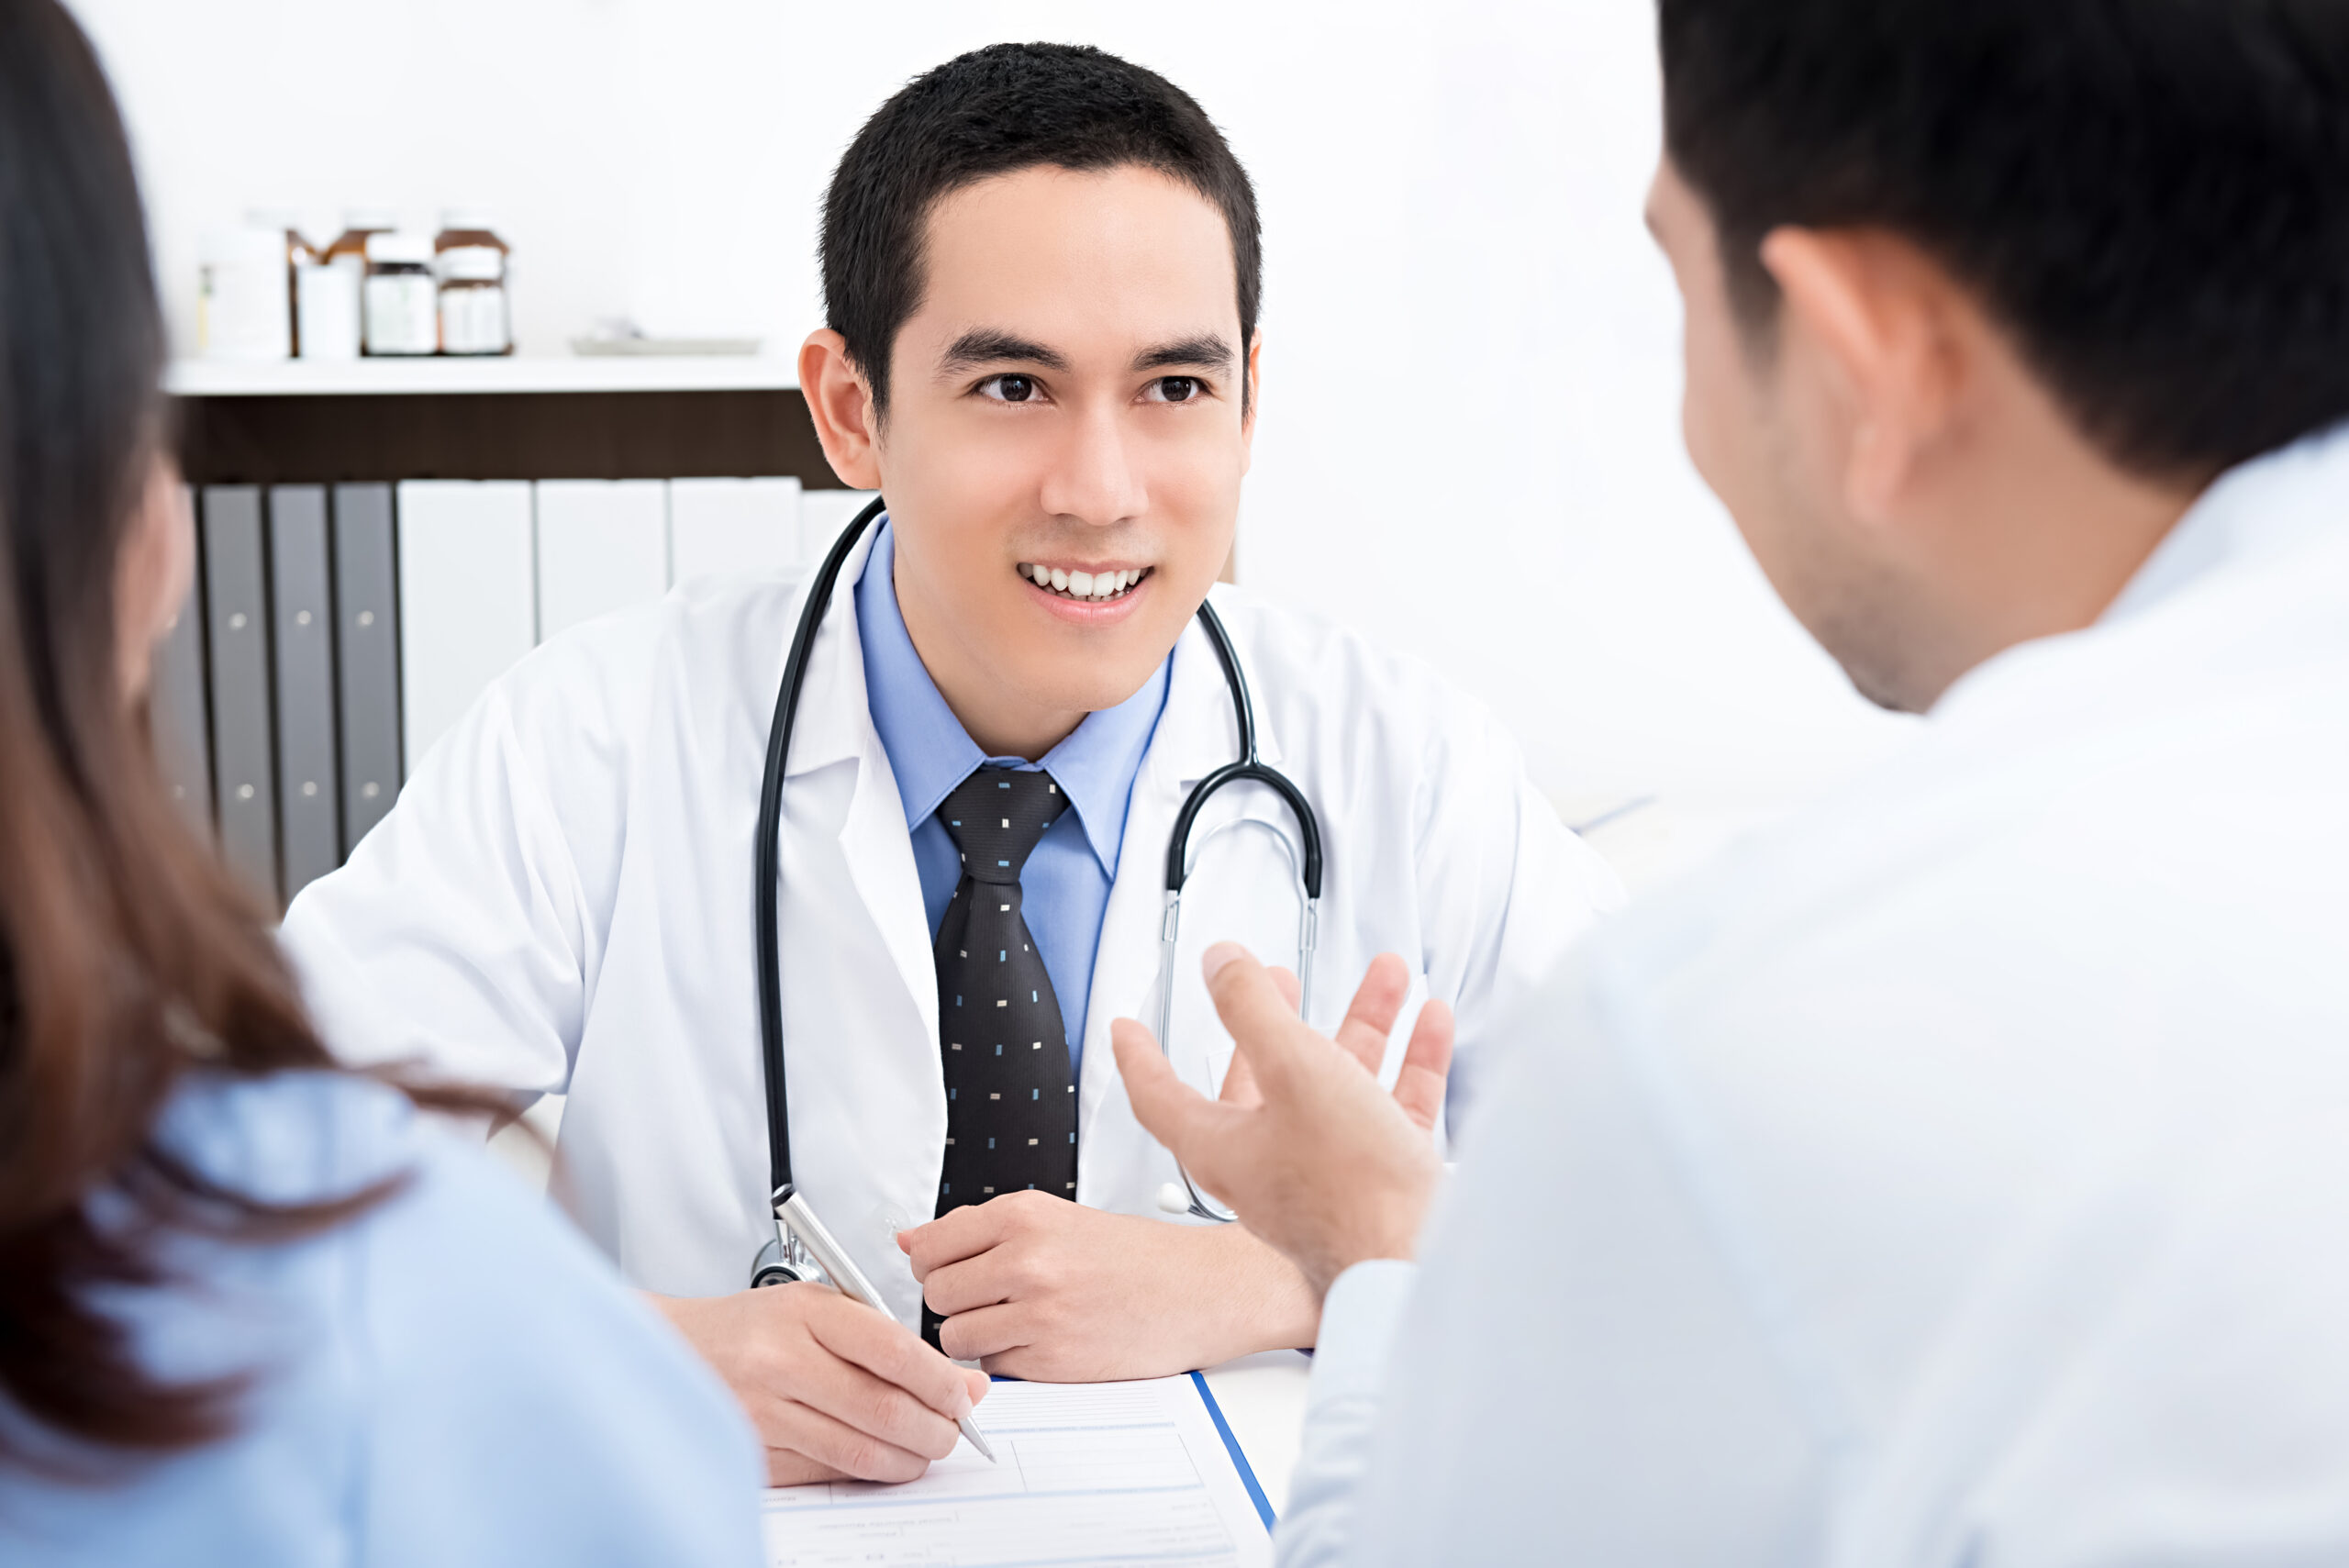 How to Foster Provider-Patient Connections as a Locum Tenens Professional